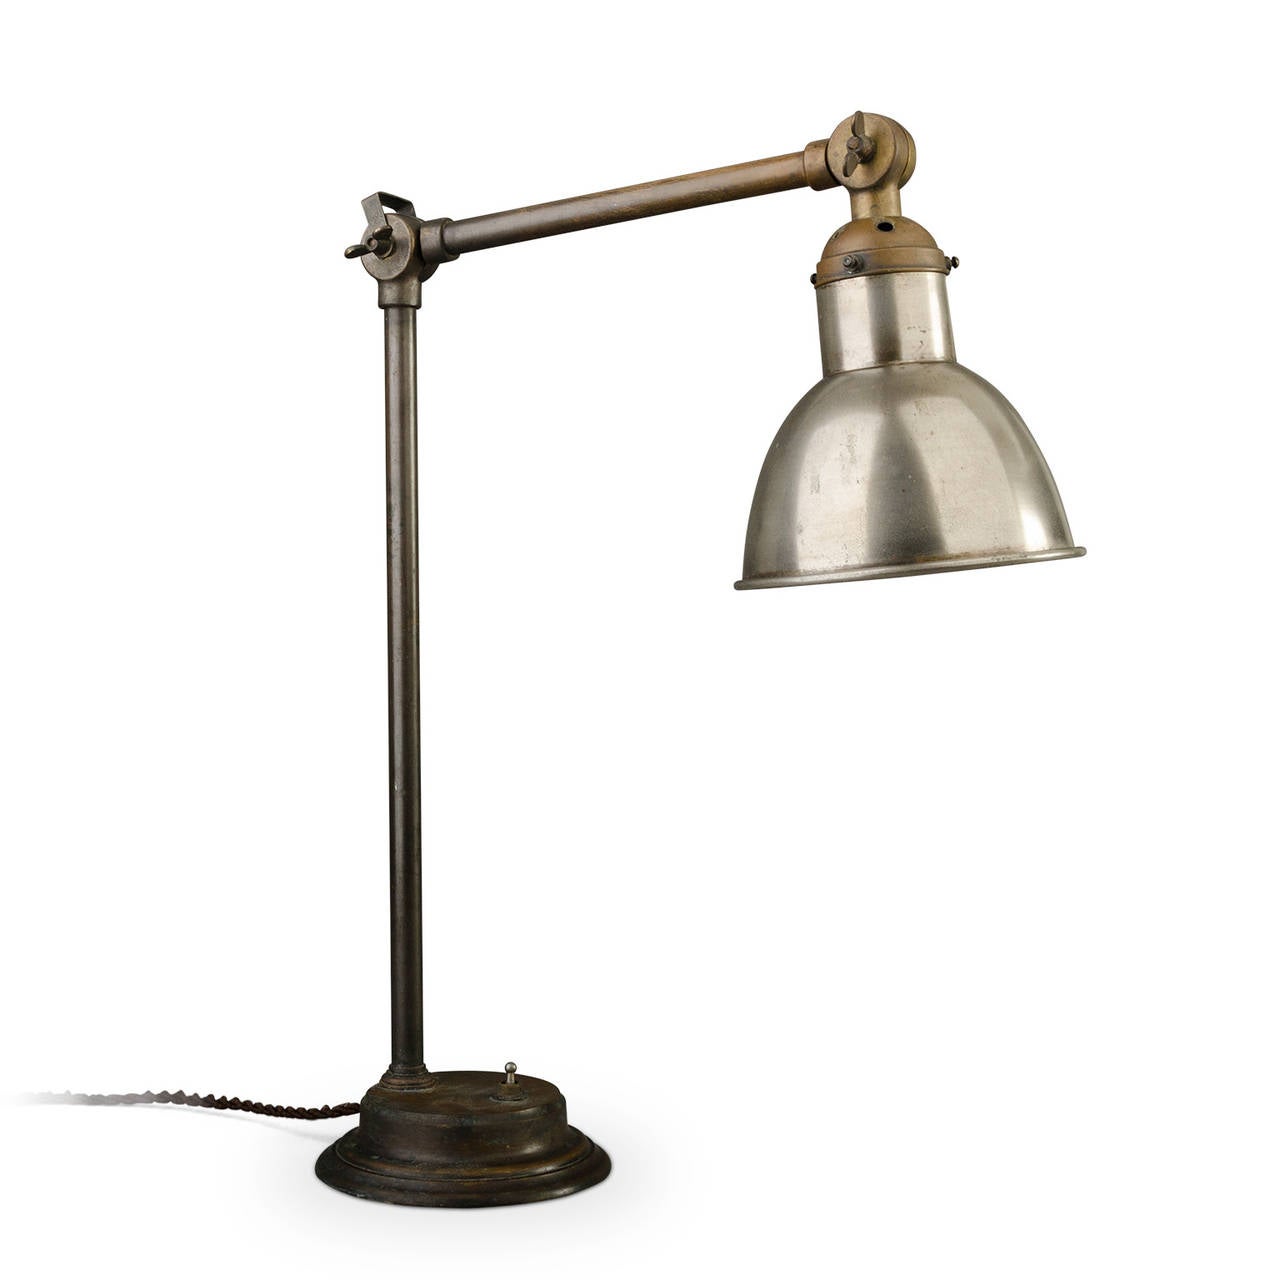 Very beautiful time patina for this articulated desk lamp. The ballasted base keep it quite stable. The reflector is in nickel-plated steel.